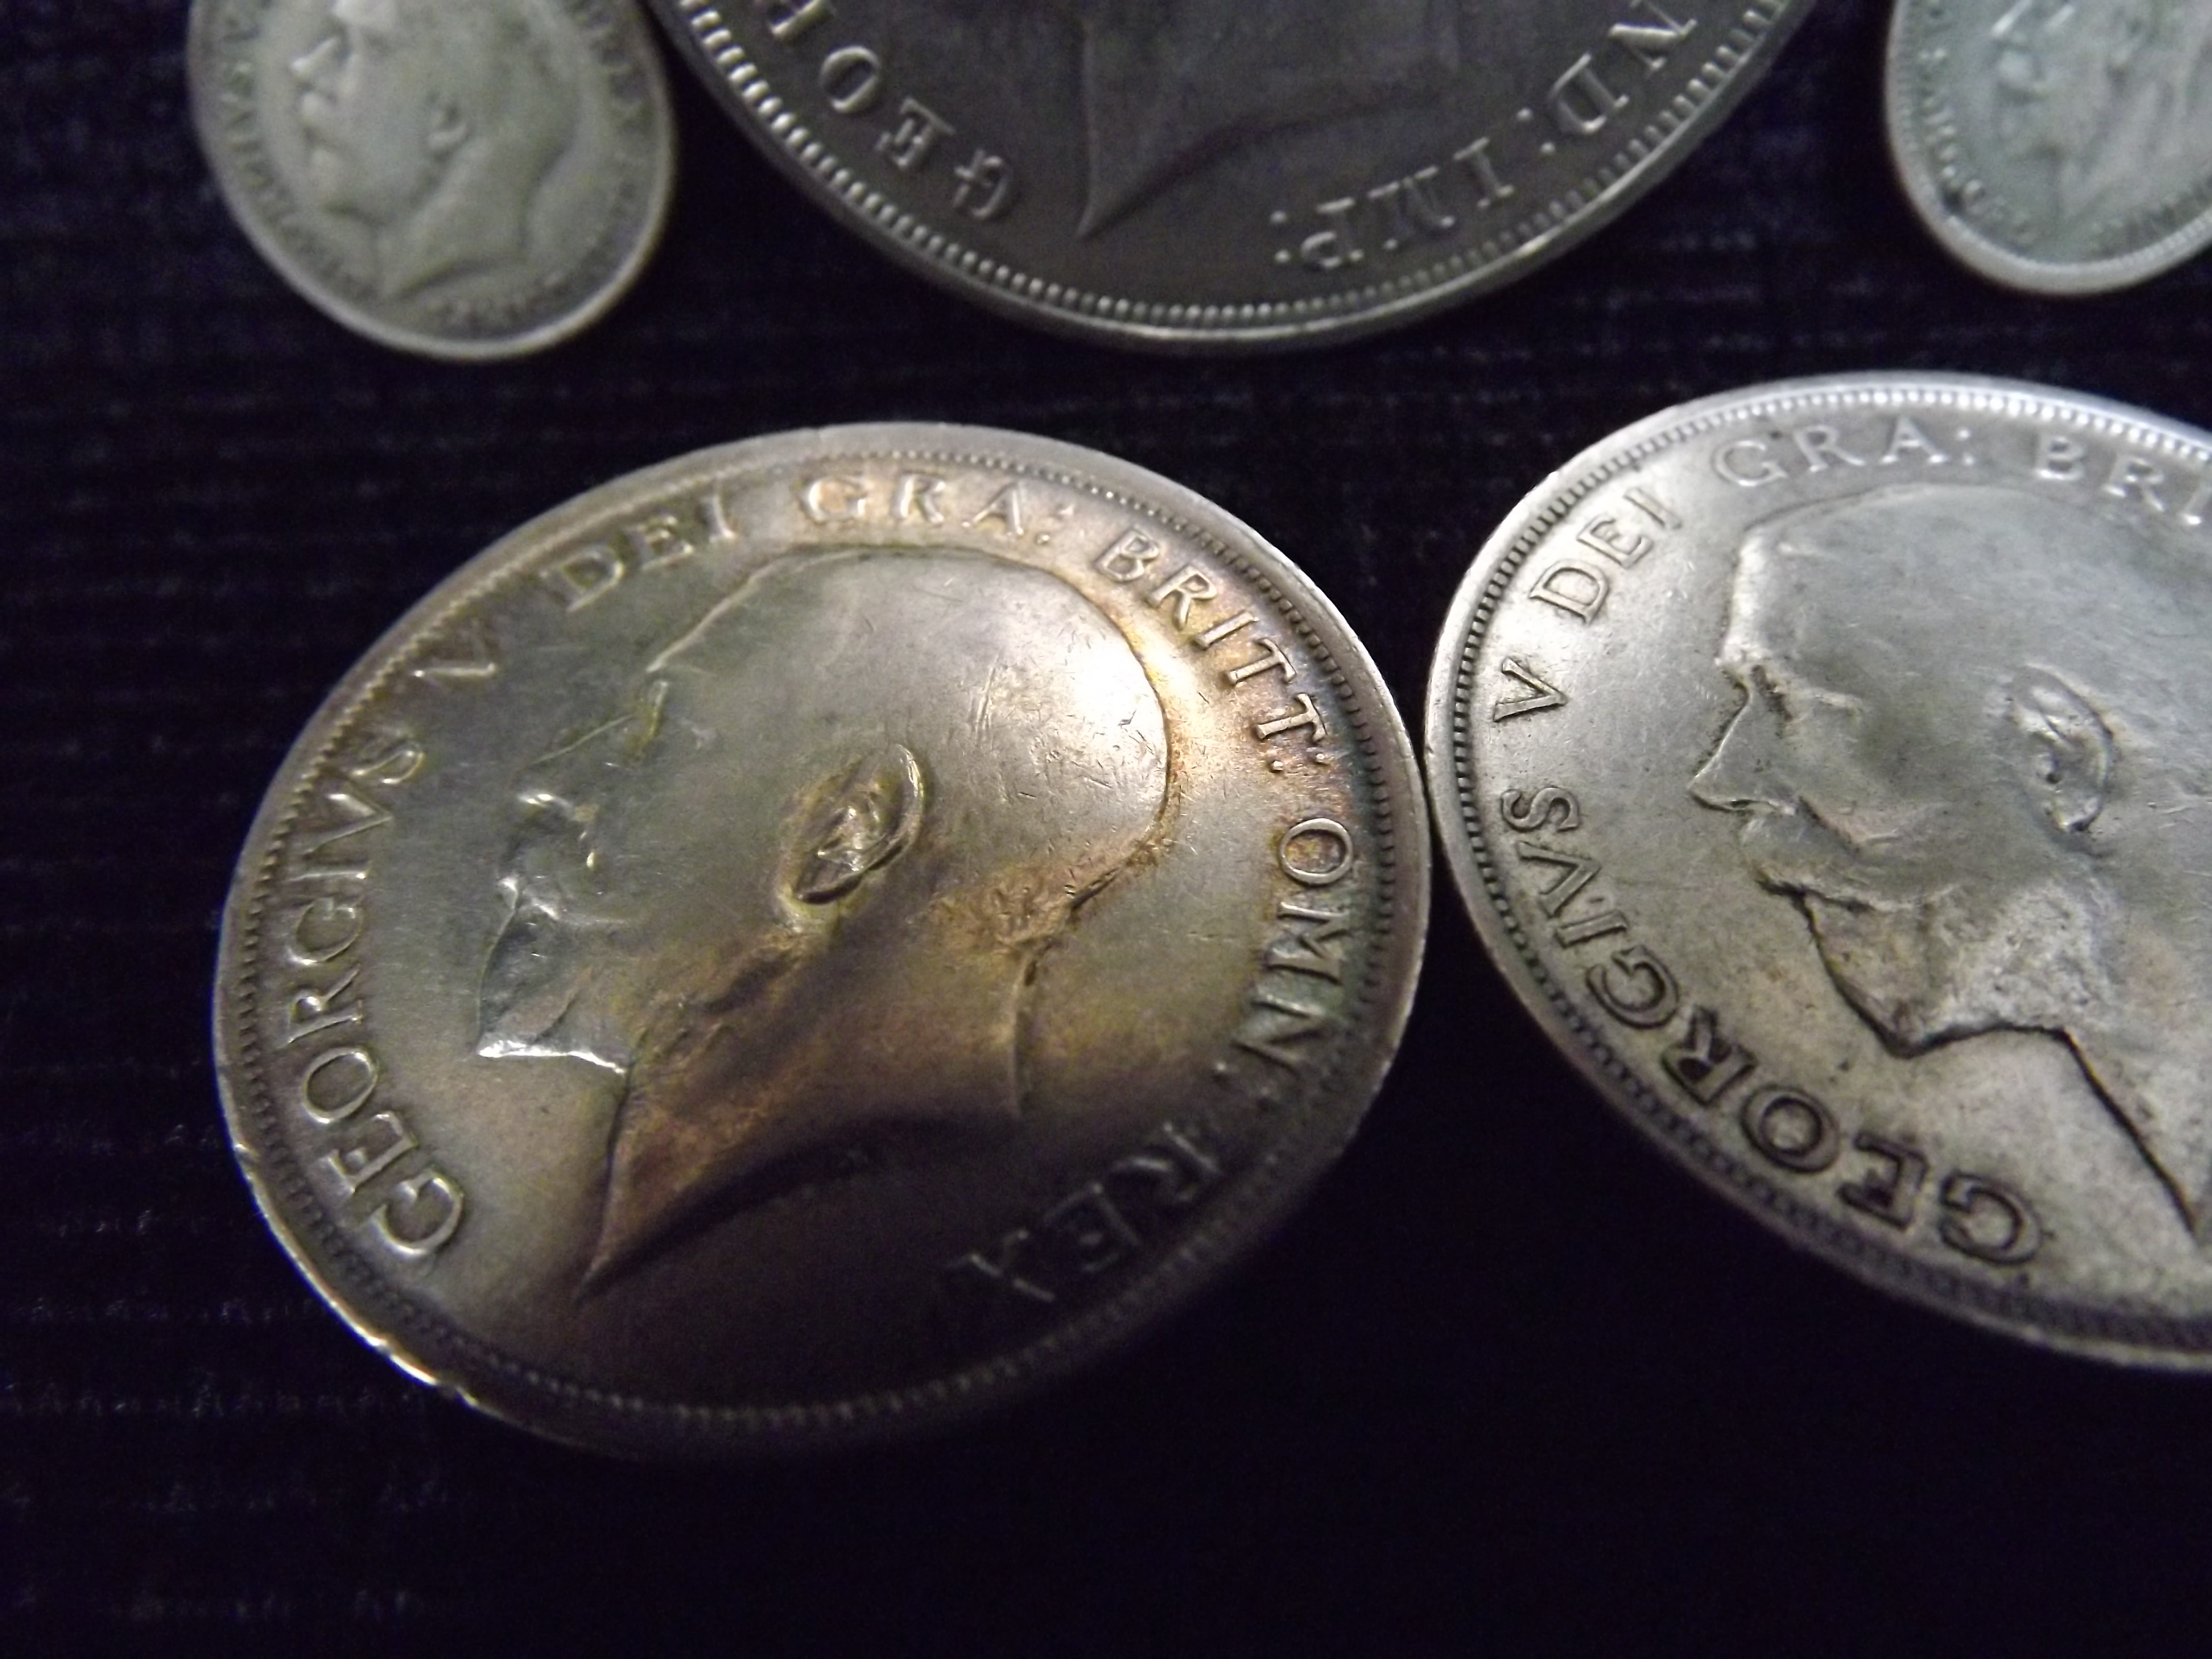 5 x George V Coins. GB Royal Mint. 1 x 1935 Crown, 2 x Half Crown 1915 & 1916 and 2 x Sixpences 1916 - Image 2 of 10